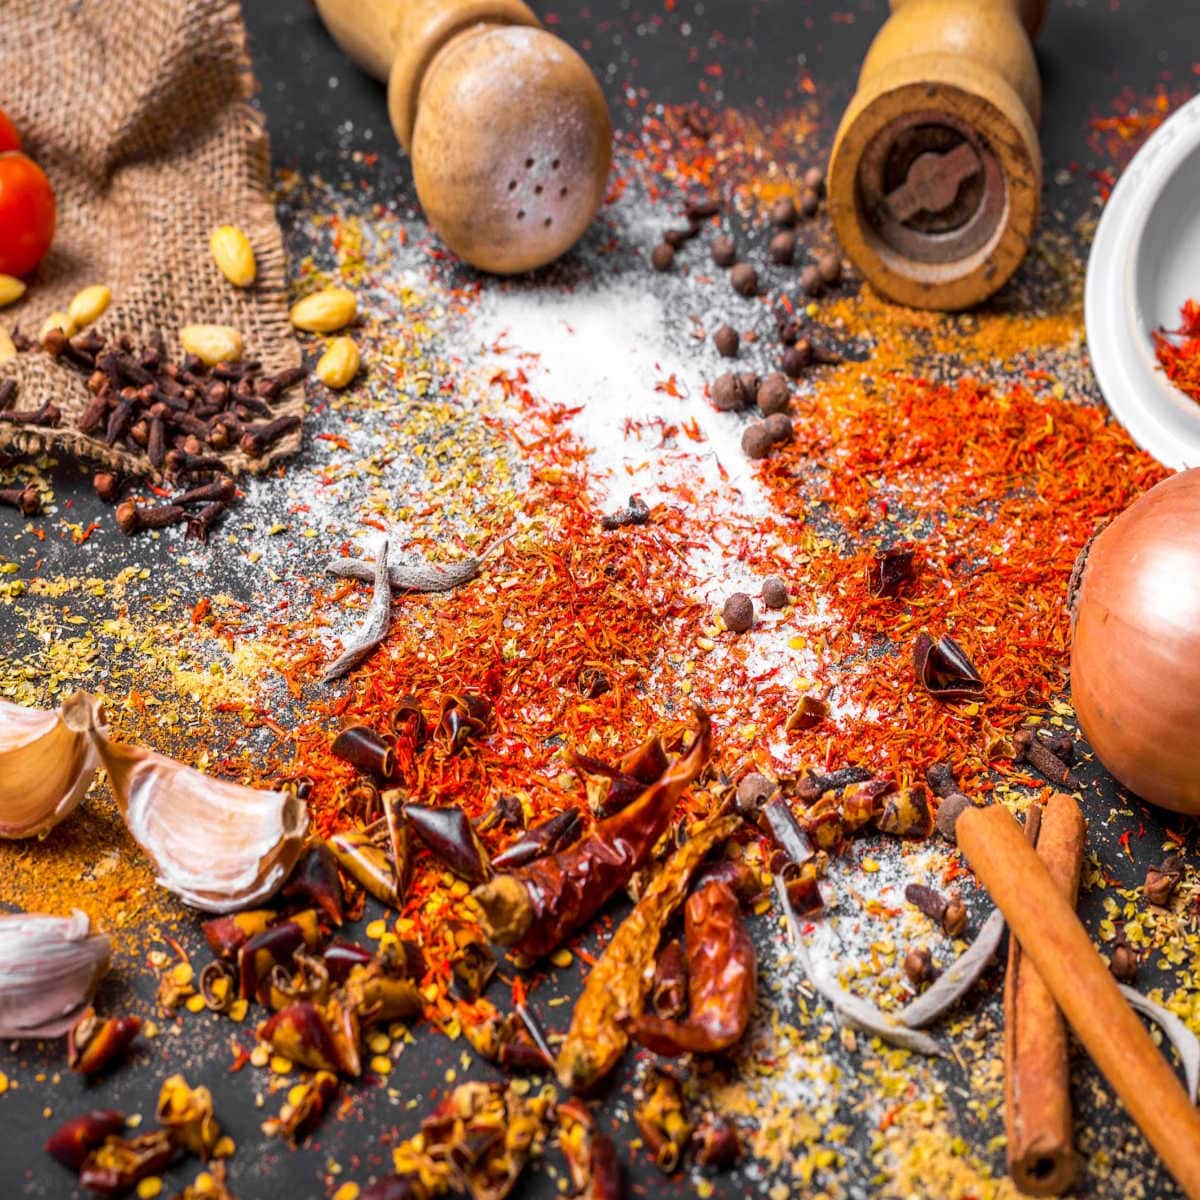 Herbs and spices all mixed together on a table.